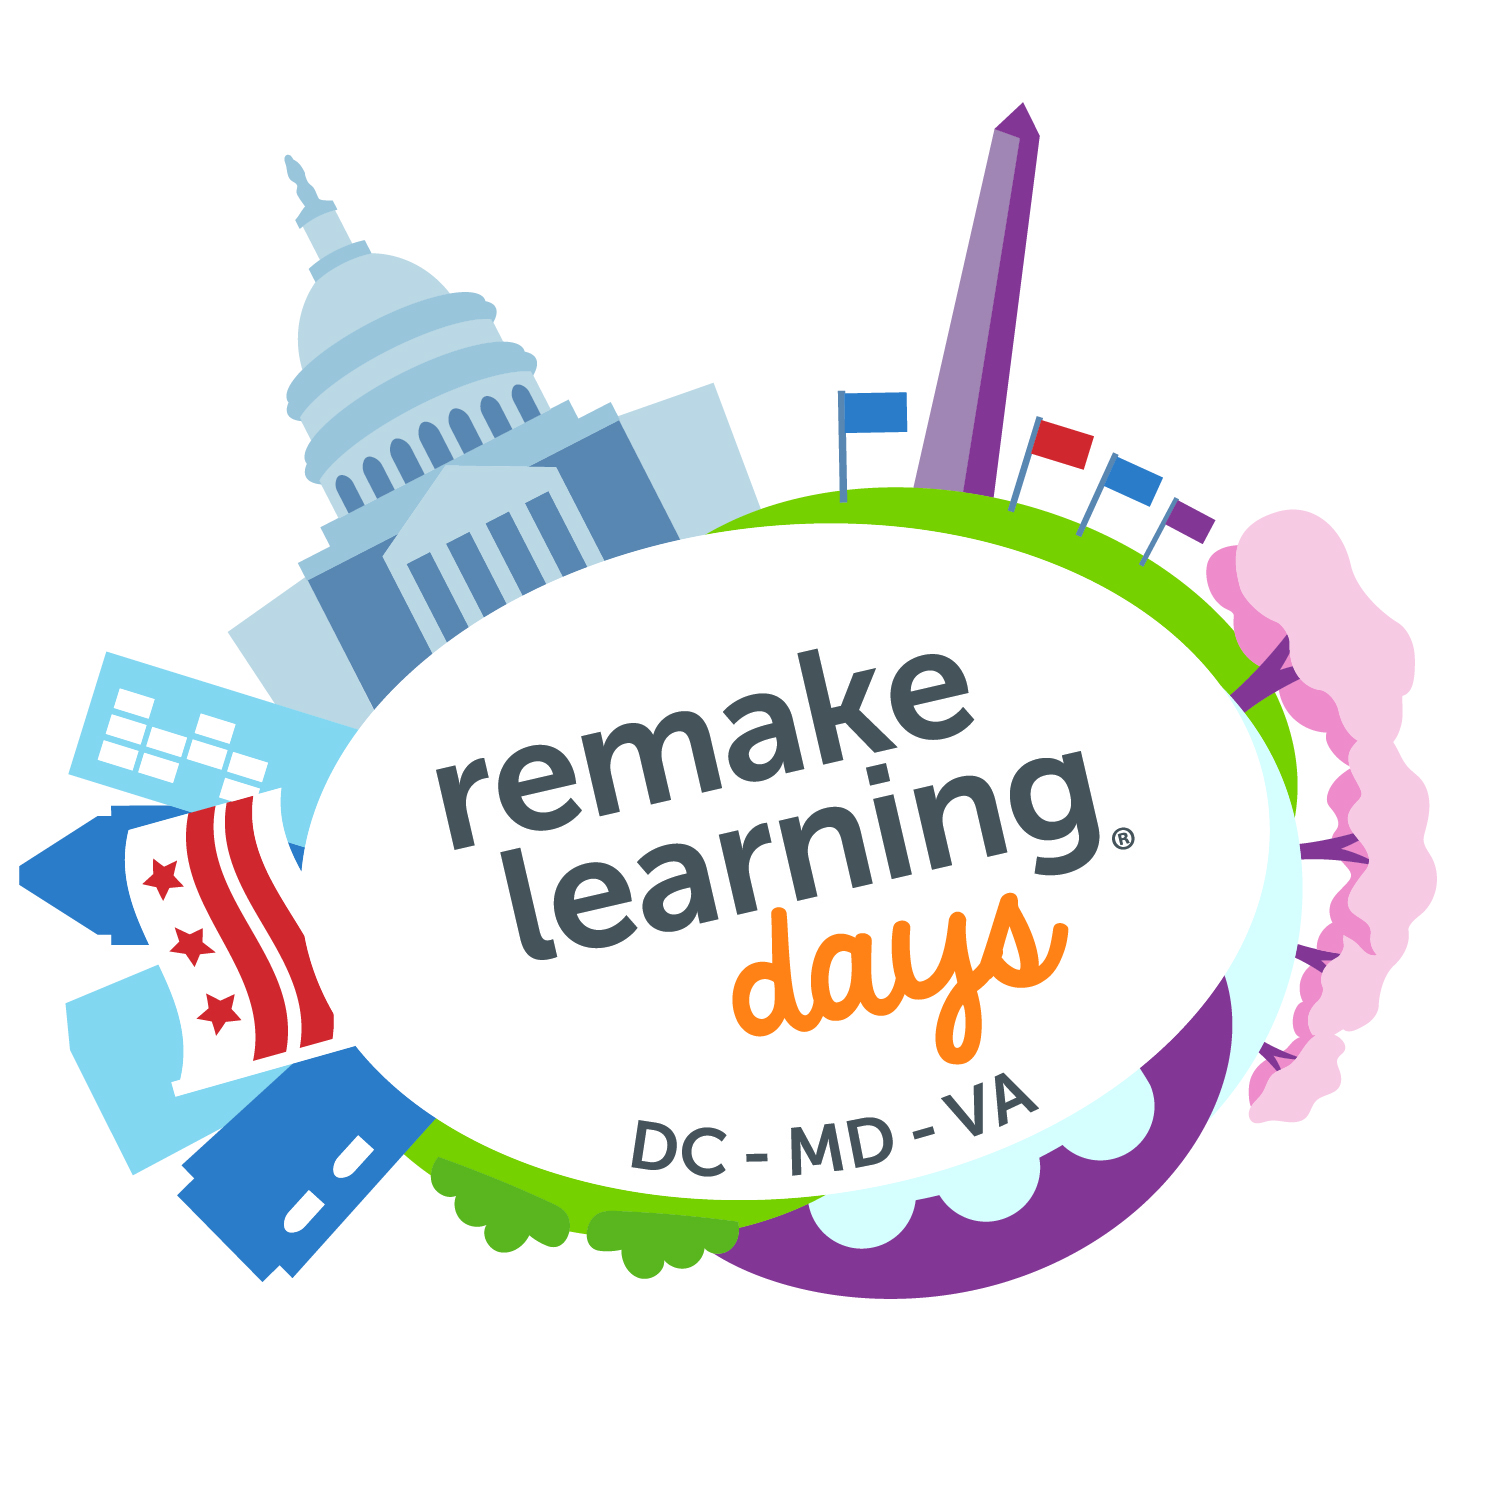 A logo with the words 'remake learning days: DC - MD - VA' in the center, surrounded by an oval of D.C. landmarks.